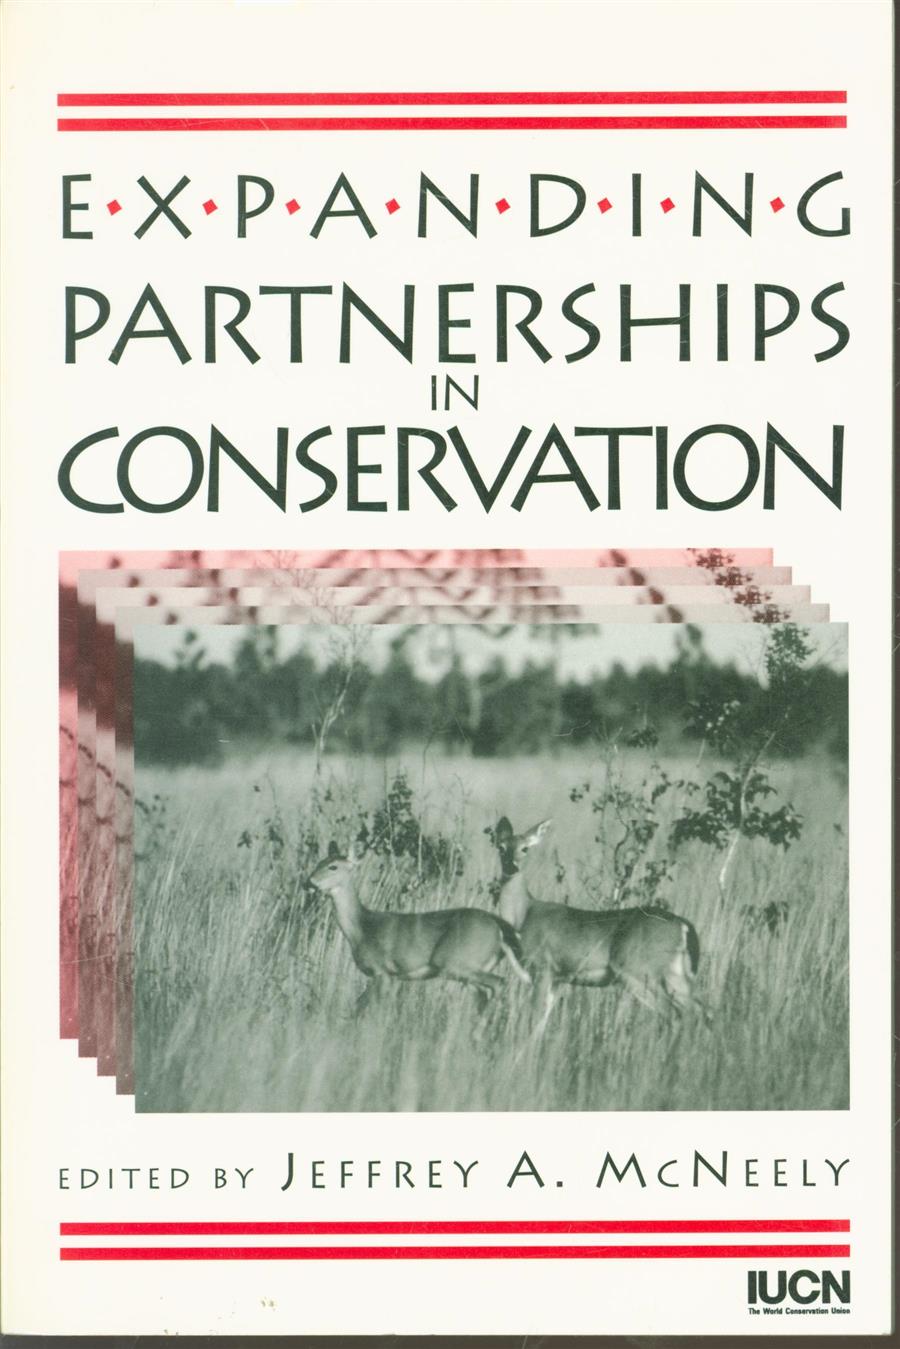 Jeffrey A McNeely, International Union for Conservation of Nature and Natural Resources., Workshop on the Economics of Protected Areas (1992: Caracas, Venezuela) - Expanding partnerships in conservation